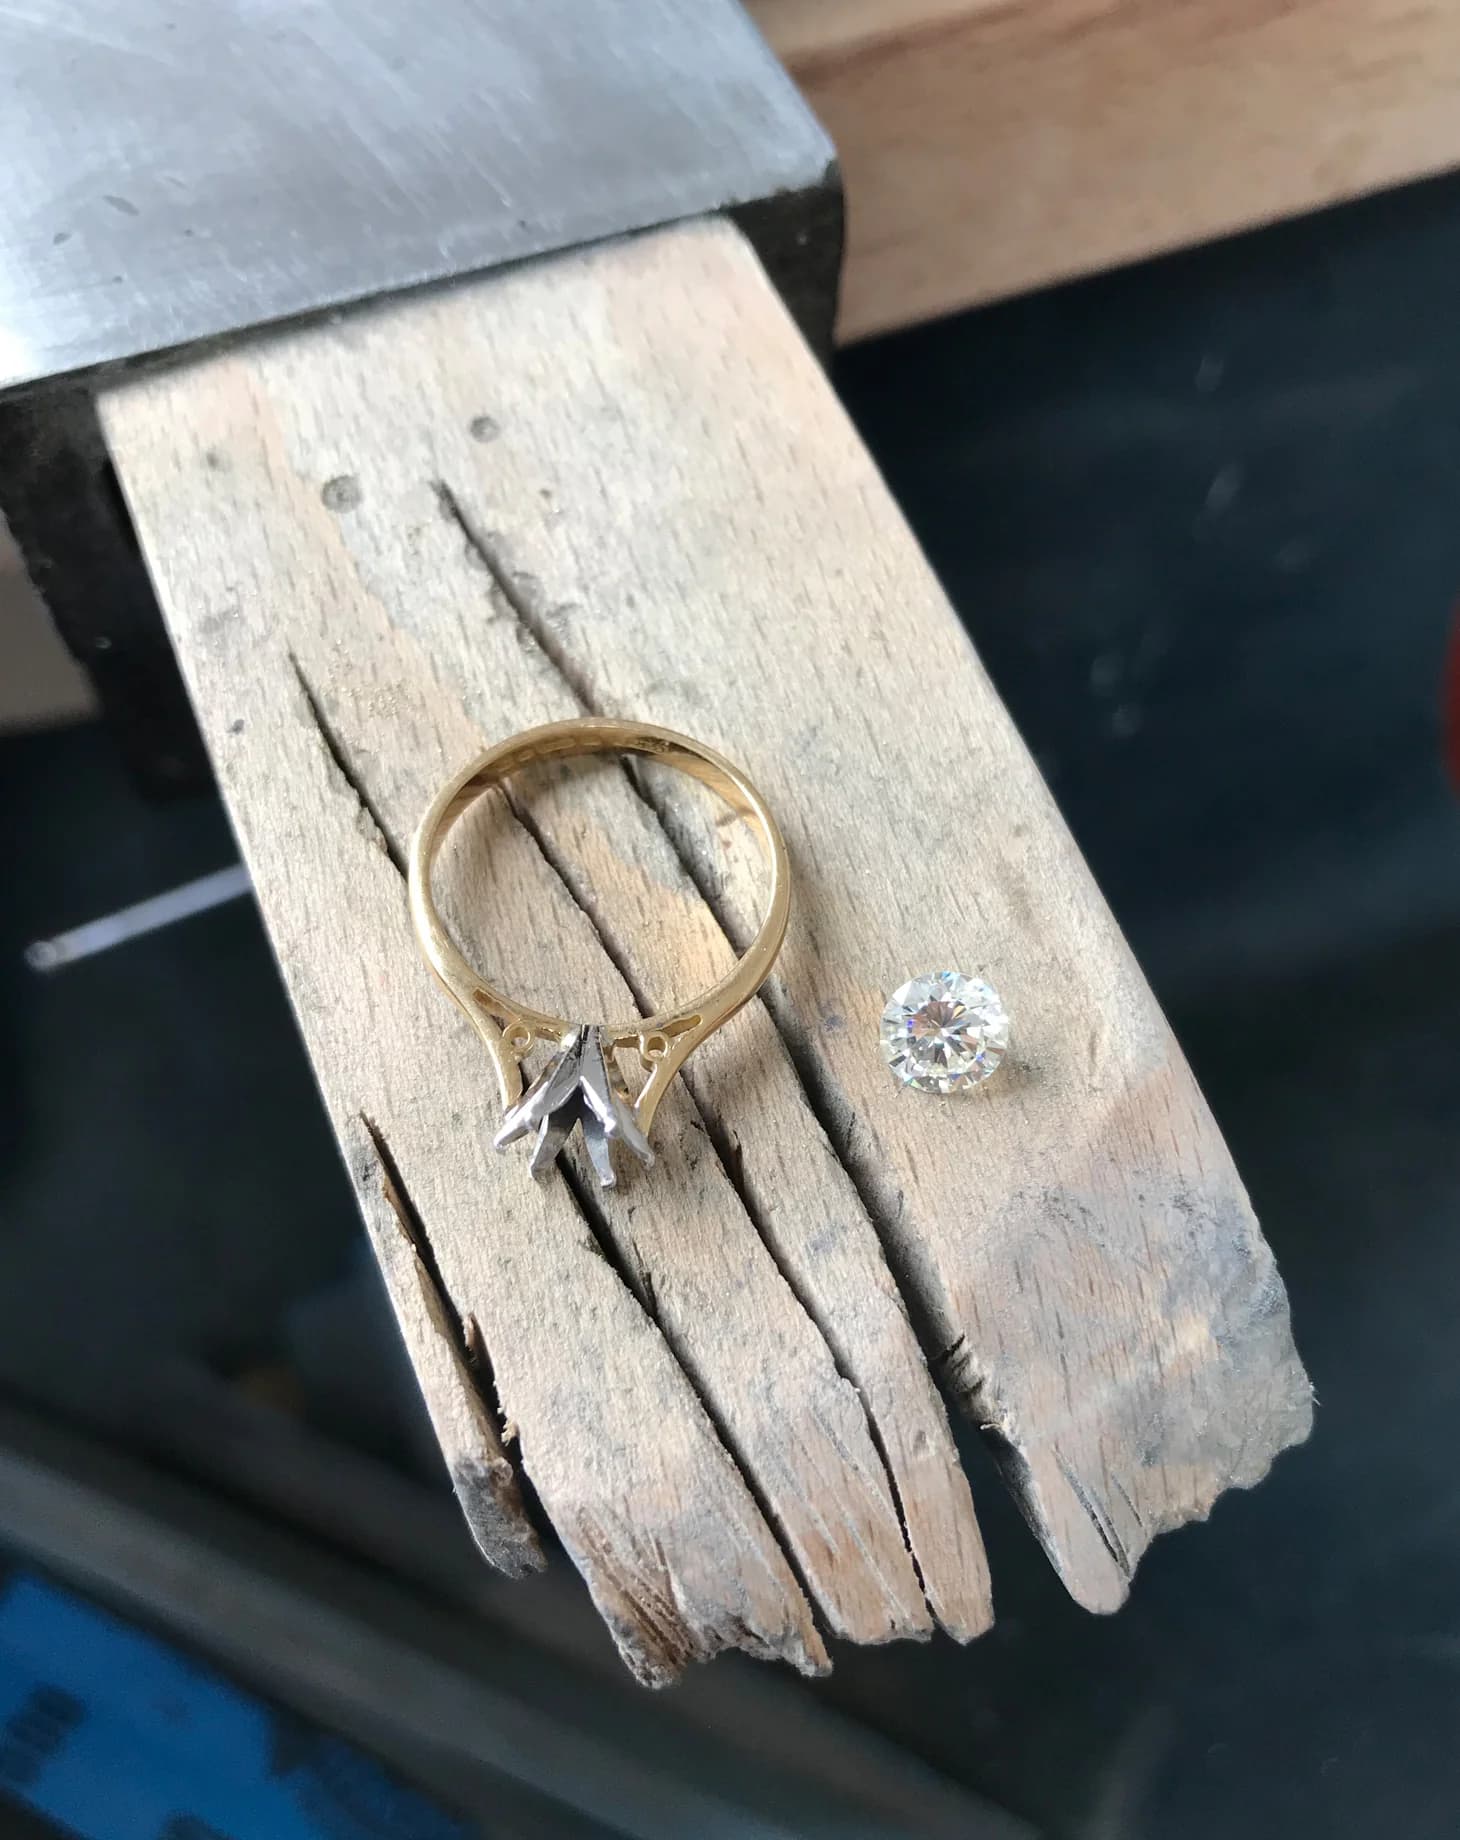 Modernising an engagement ring – Shimell and Madden